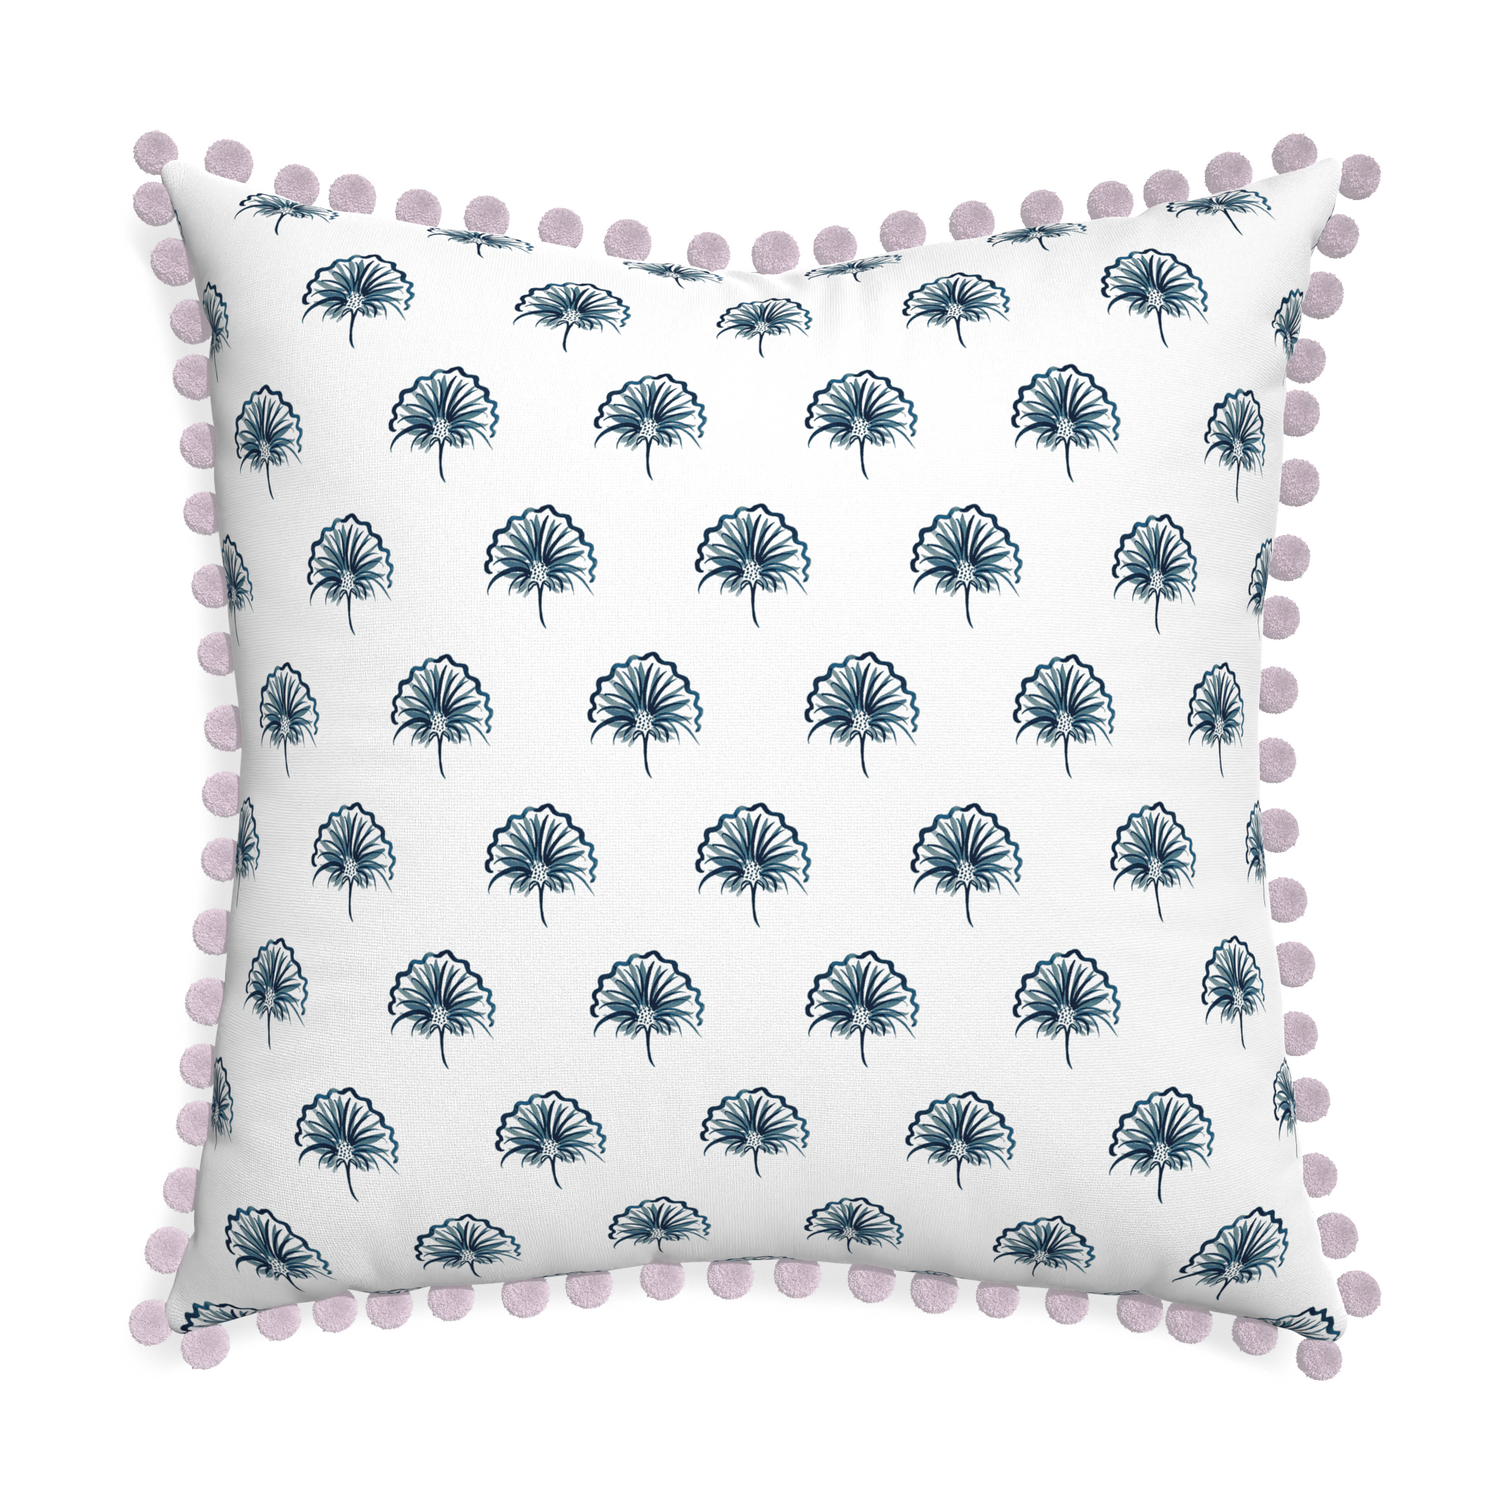 Euro-sham penelope midnight custom floral navypillow with l on white background